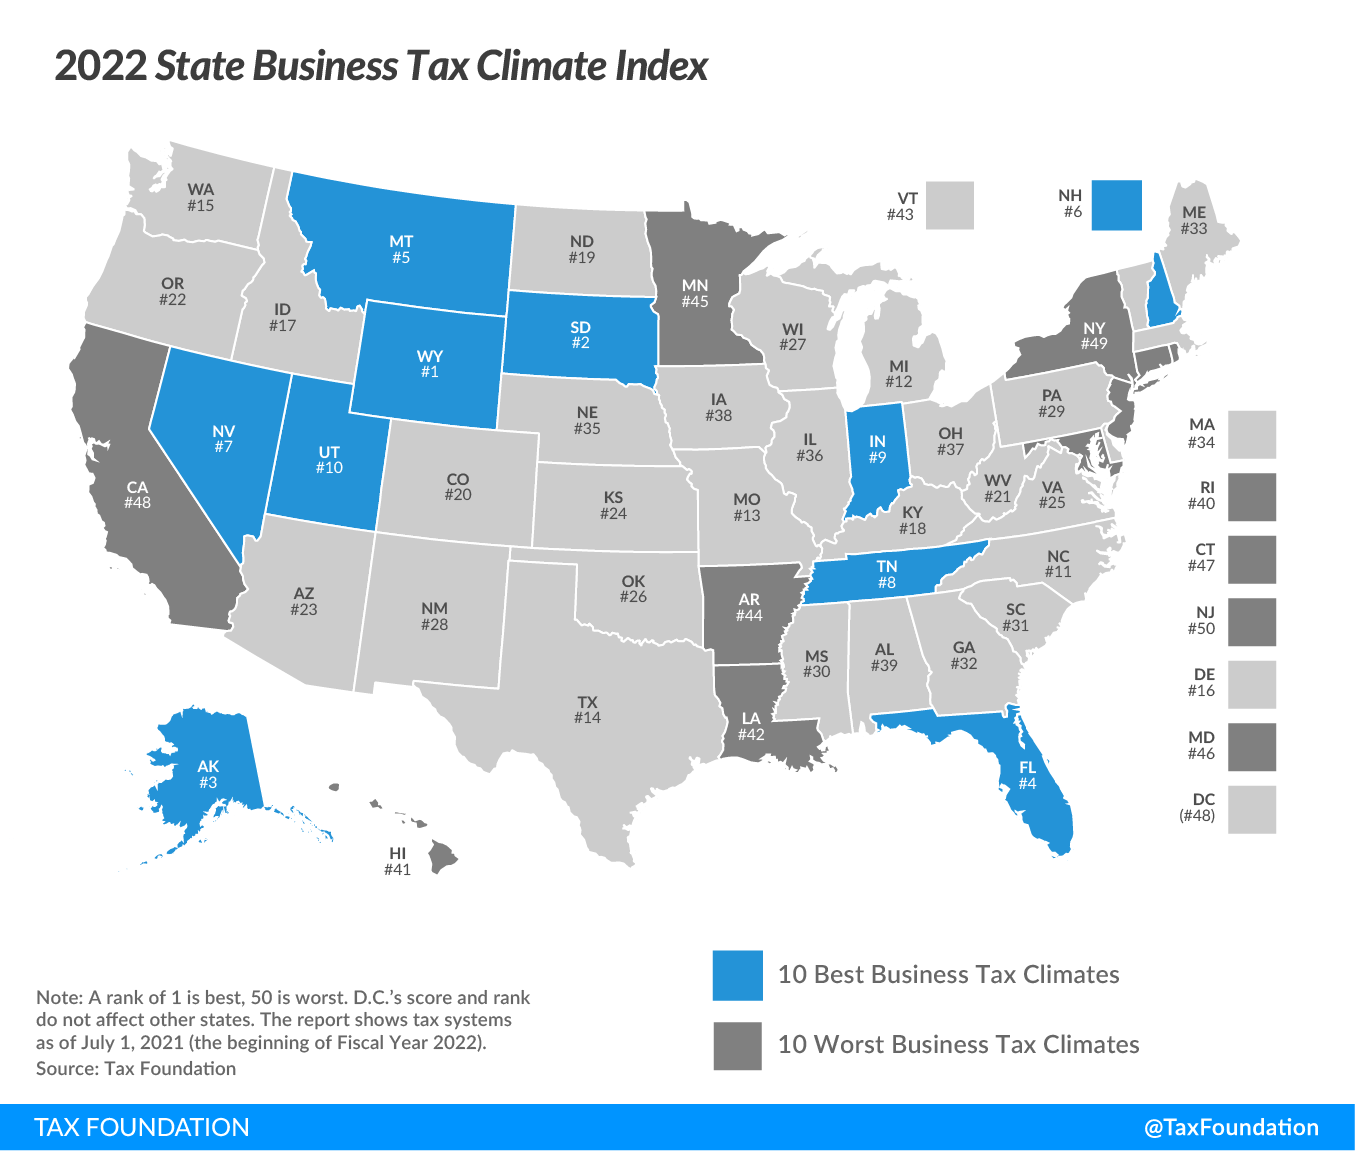 2022 State Business Tax Climate Index 2022 State Tax Rankings and 2022 State Business Rankings